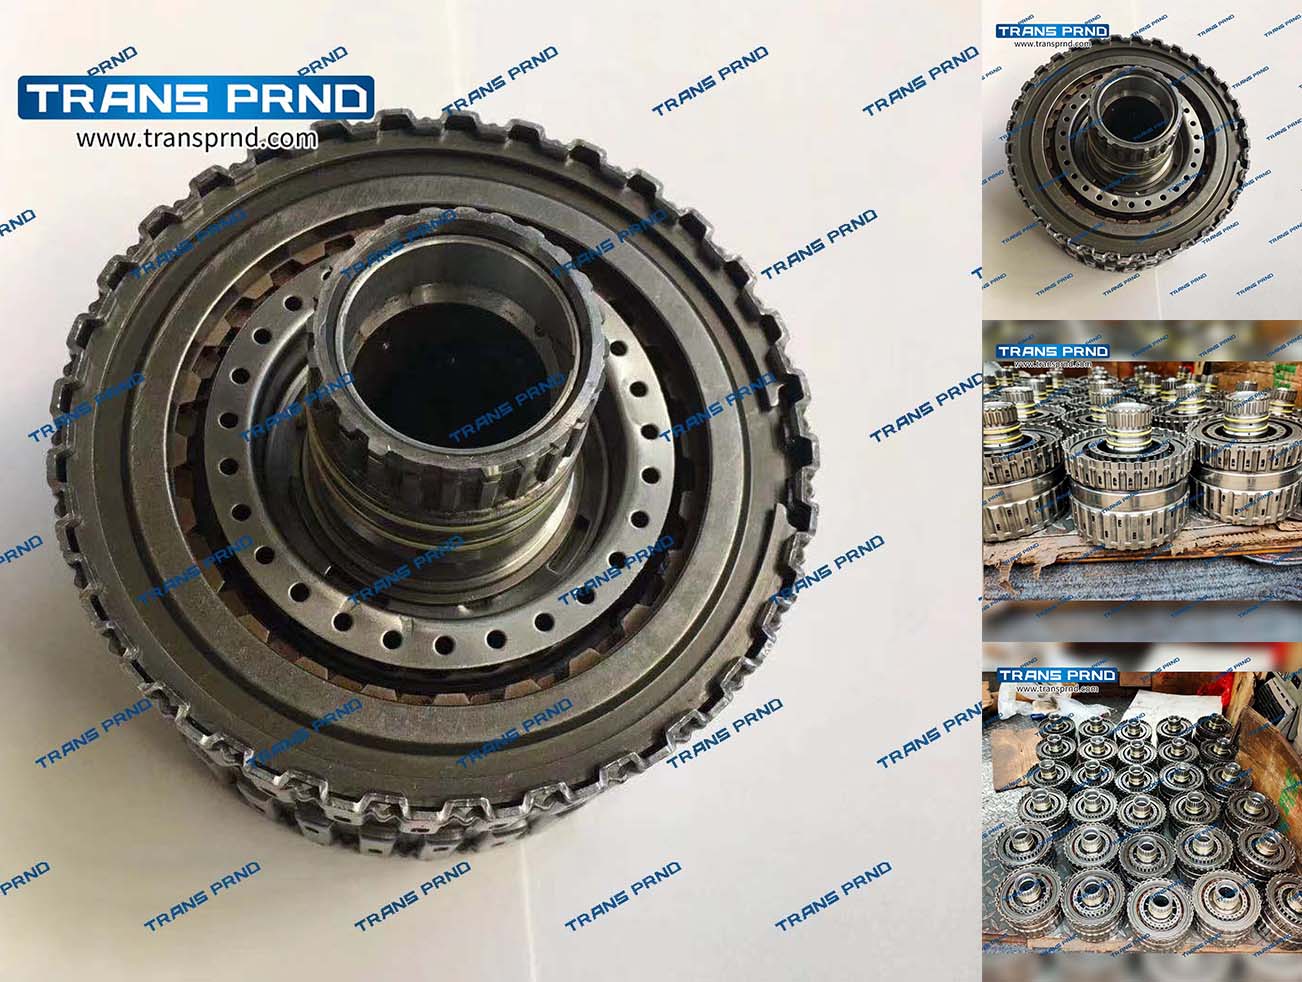 CD4E used Double-sided clutch 二手双面离合器